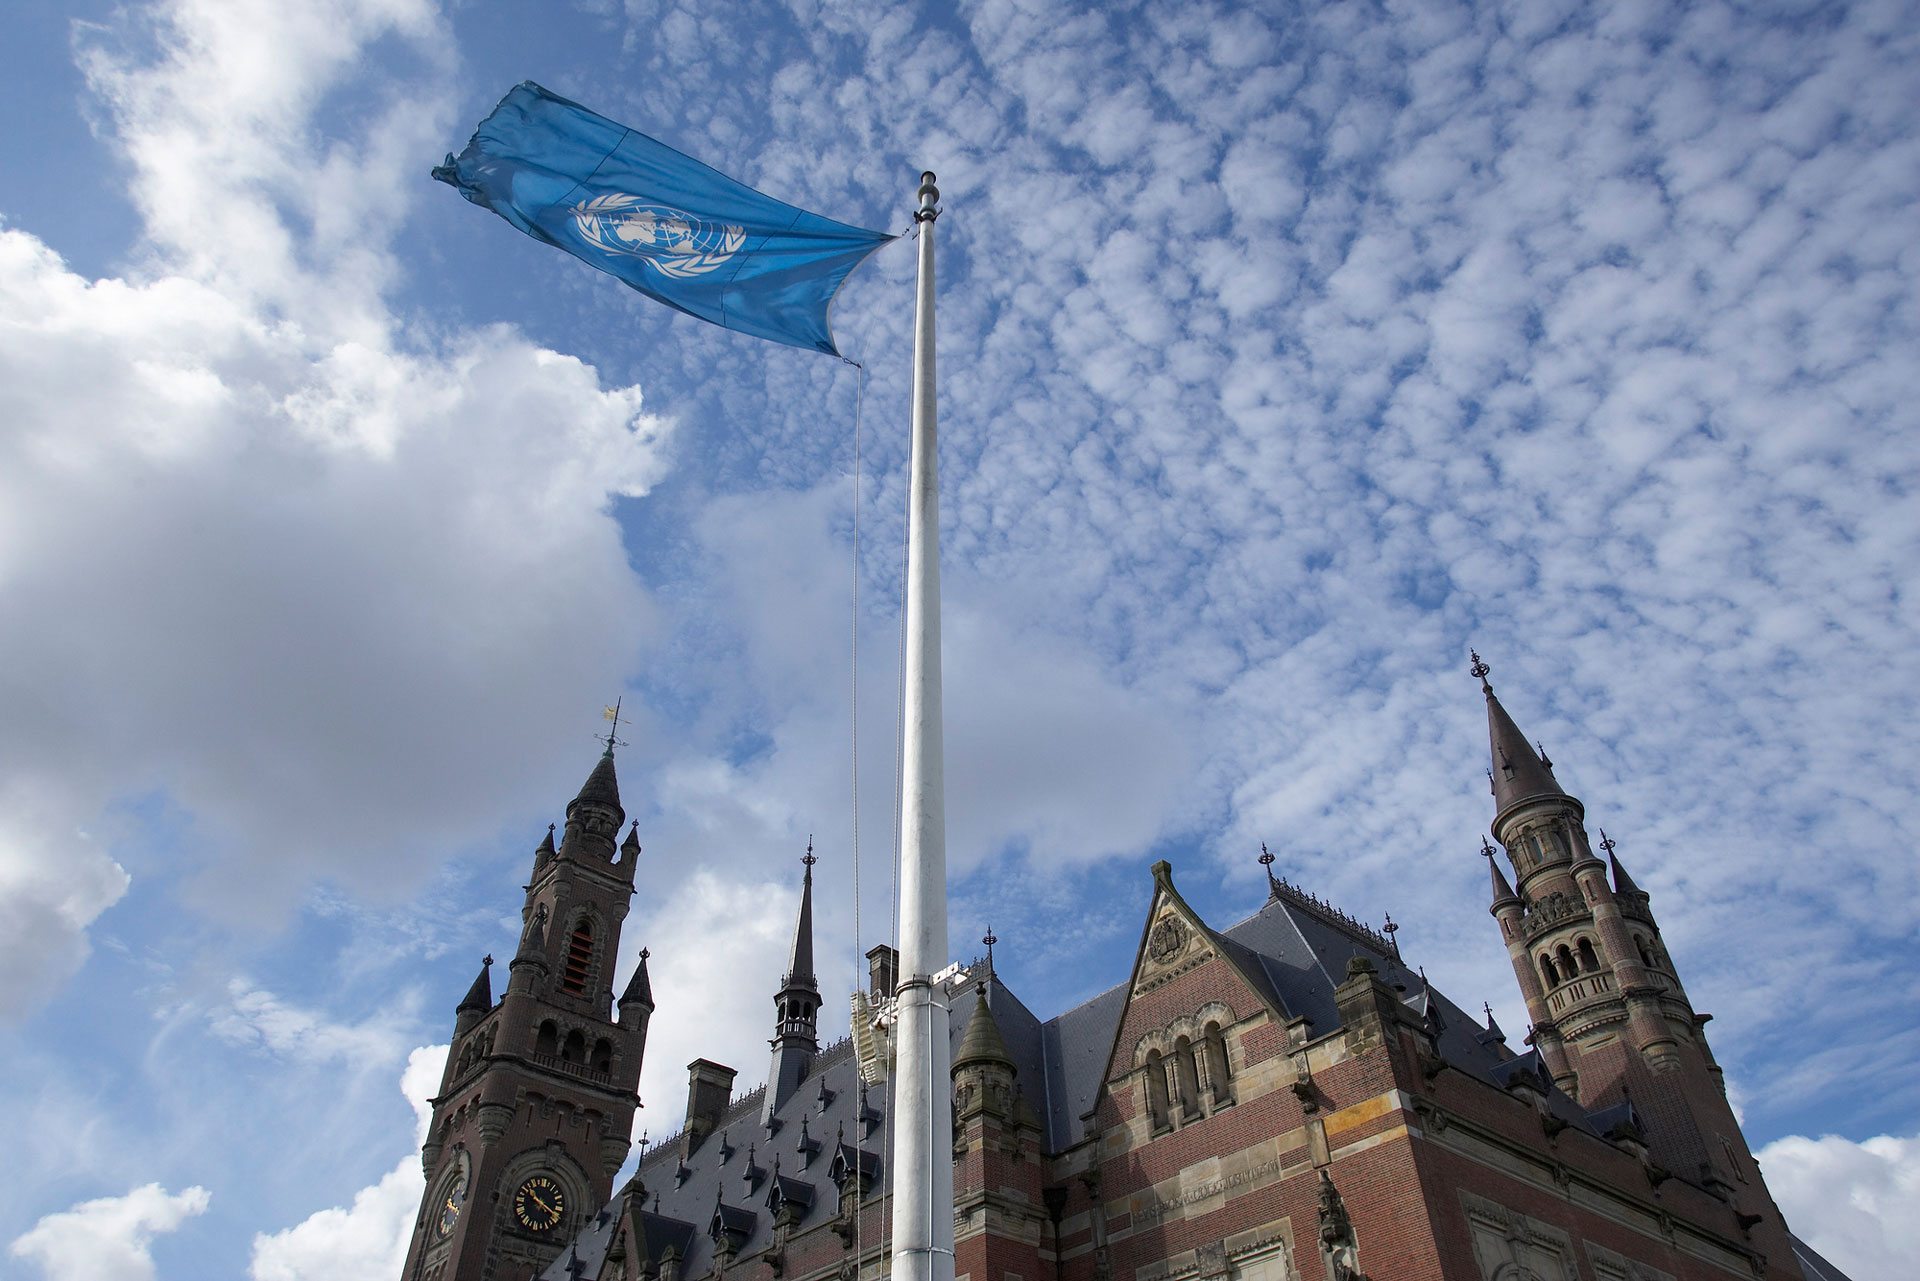 <p><sub>The Peace Palace, seat of the International Court of Justice (ICJ), at The Hague, Netherlands.</sub></p>